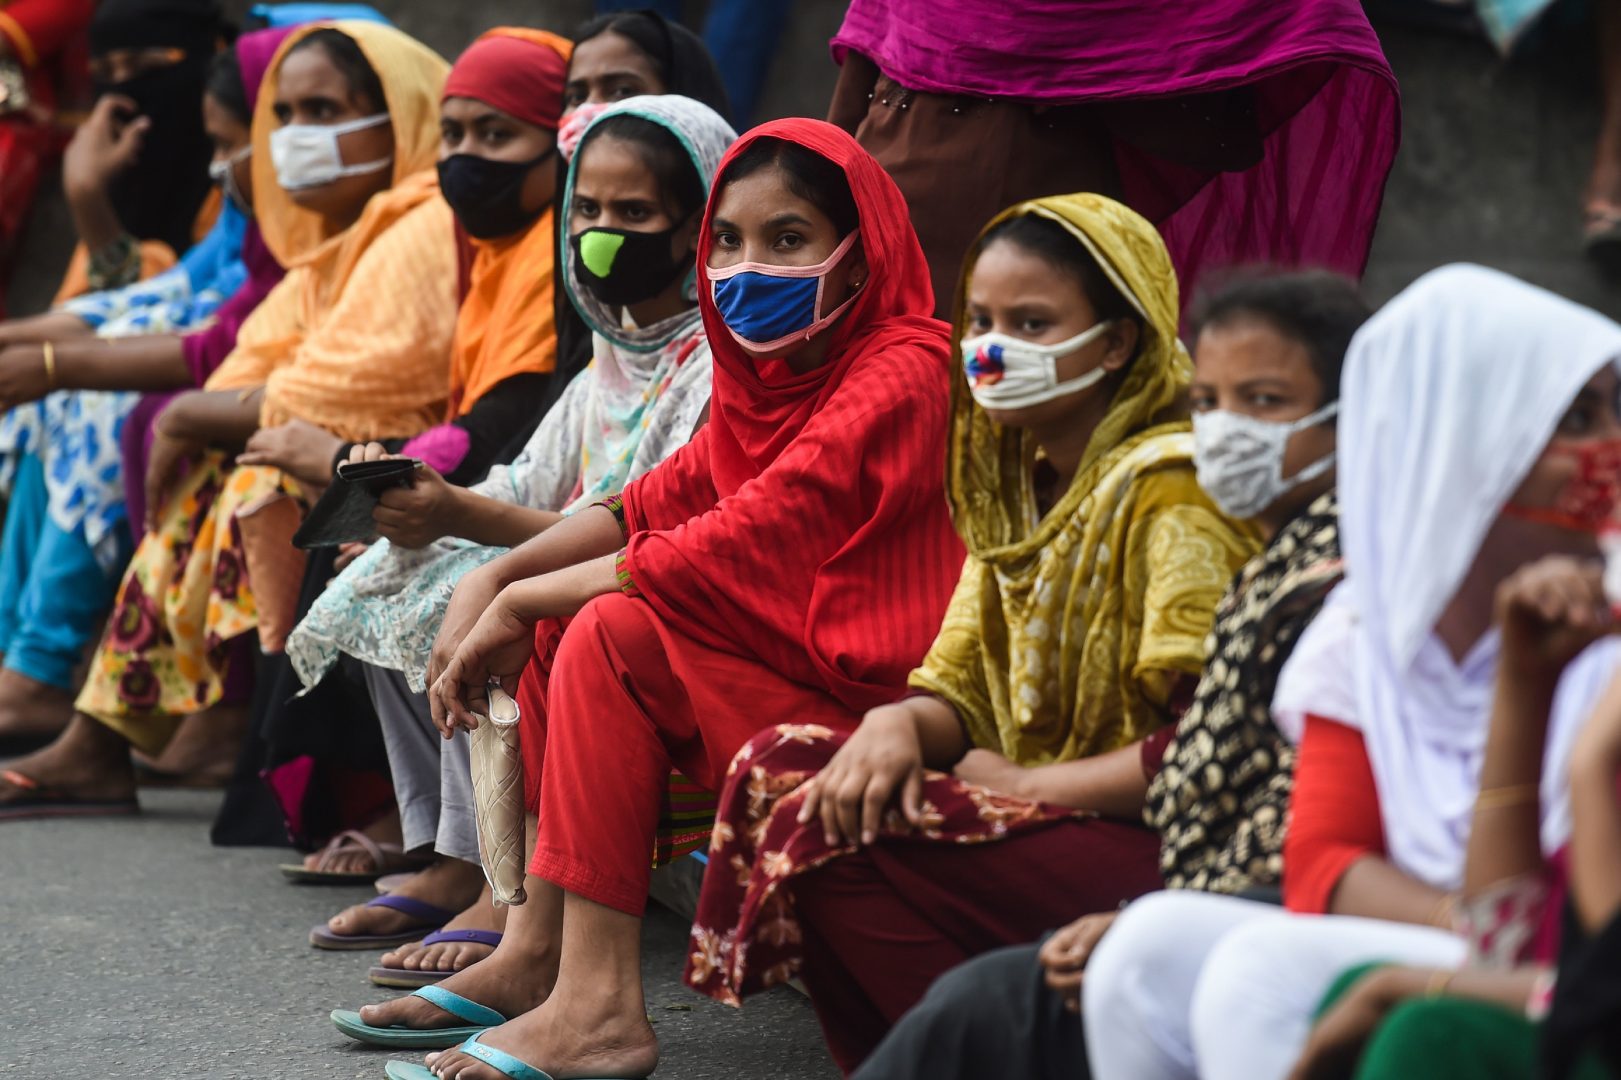 Workers from the garment sector block a road during a protest to demand payment of due wages, in Dhaka, Bangladesh, in April. Thousands of garment workers who produce items for top Western fashion brands protested against unpaid wages, saying they were more afraid of starving than contracting the coronavirus.